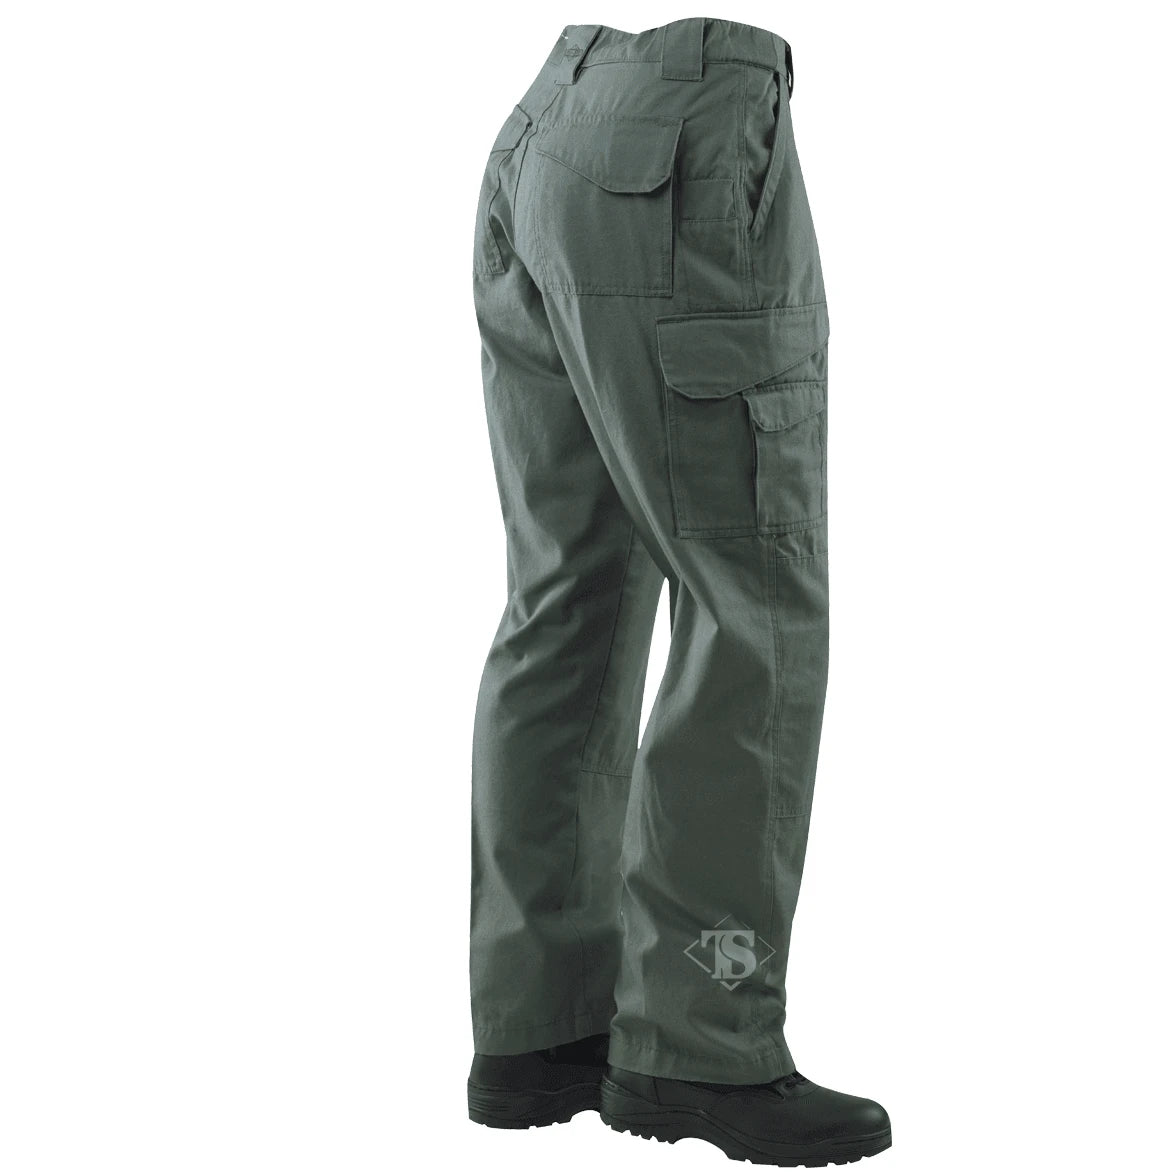 24-7 Tactical Pants: Olive Drab - POCO R/S – Army Navy Marine Store